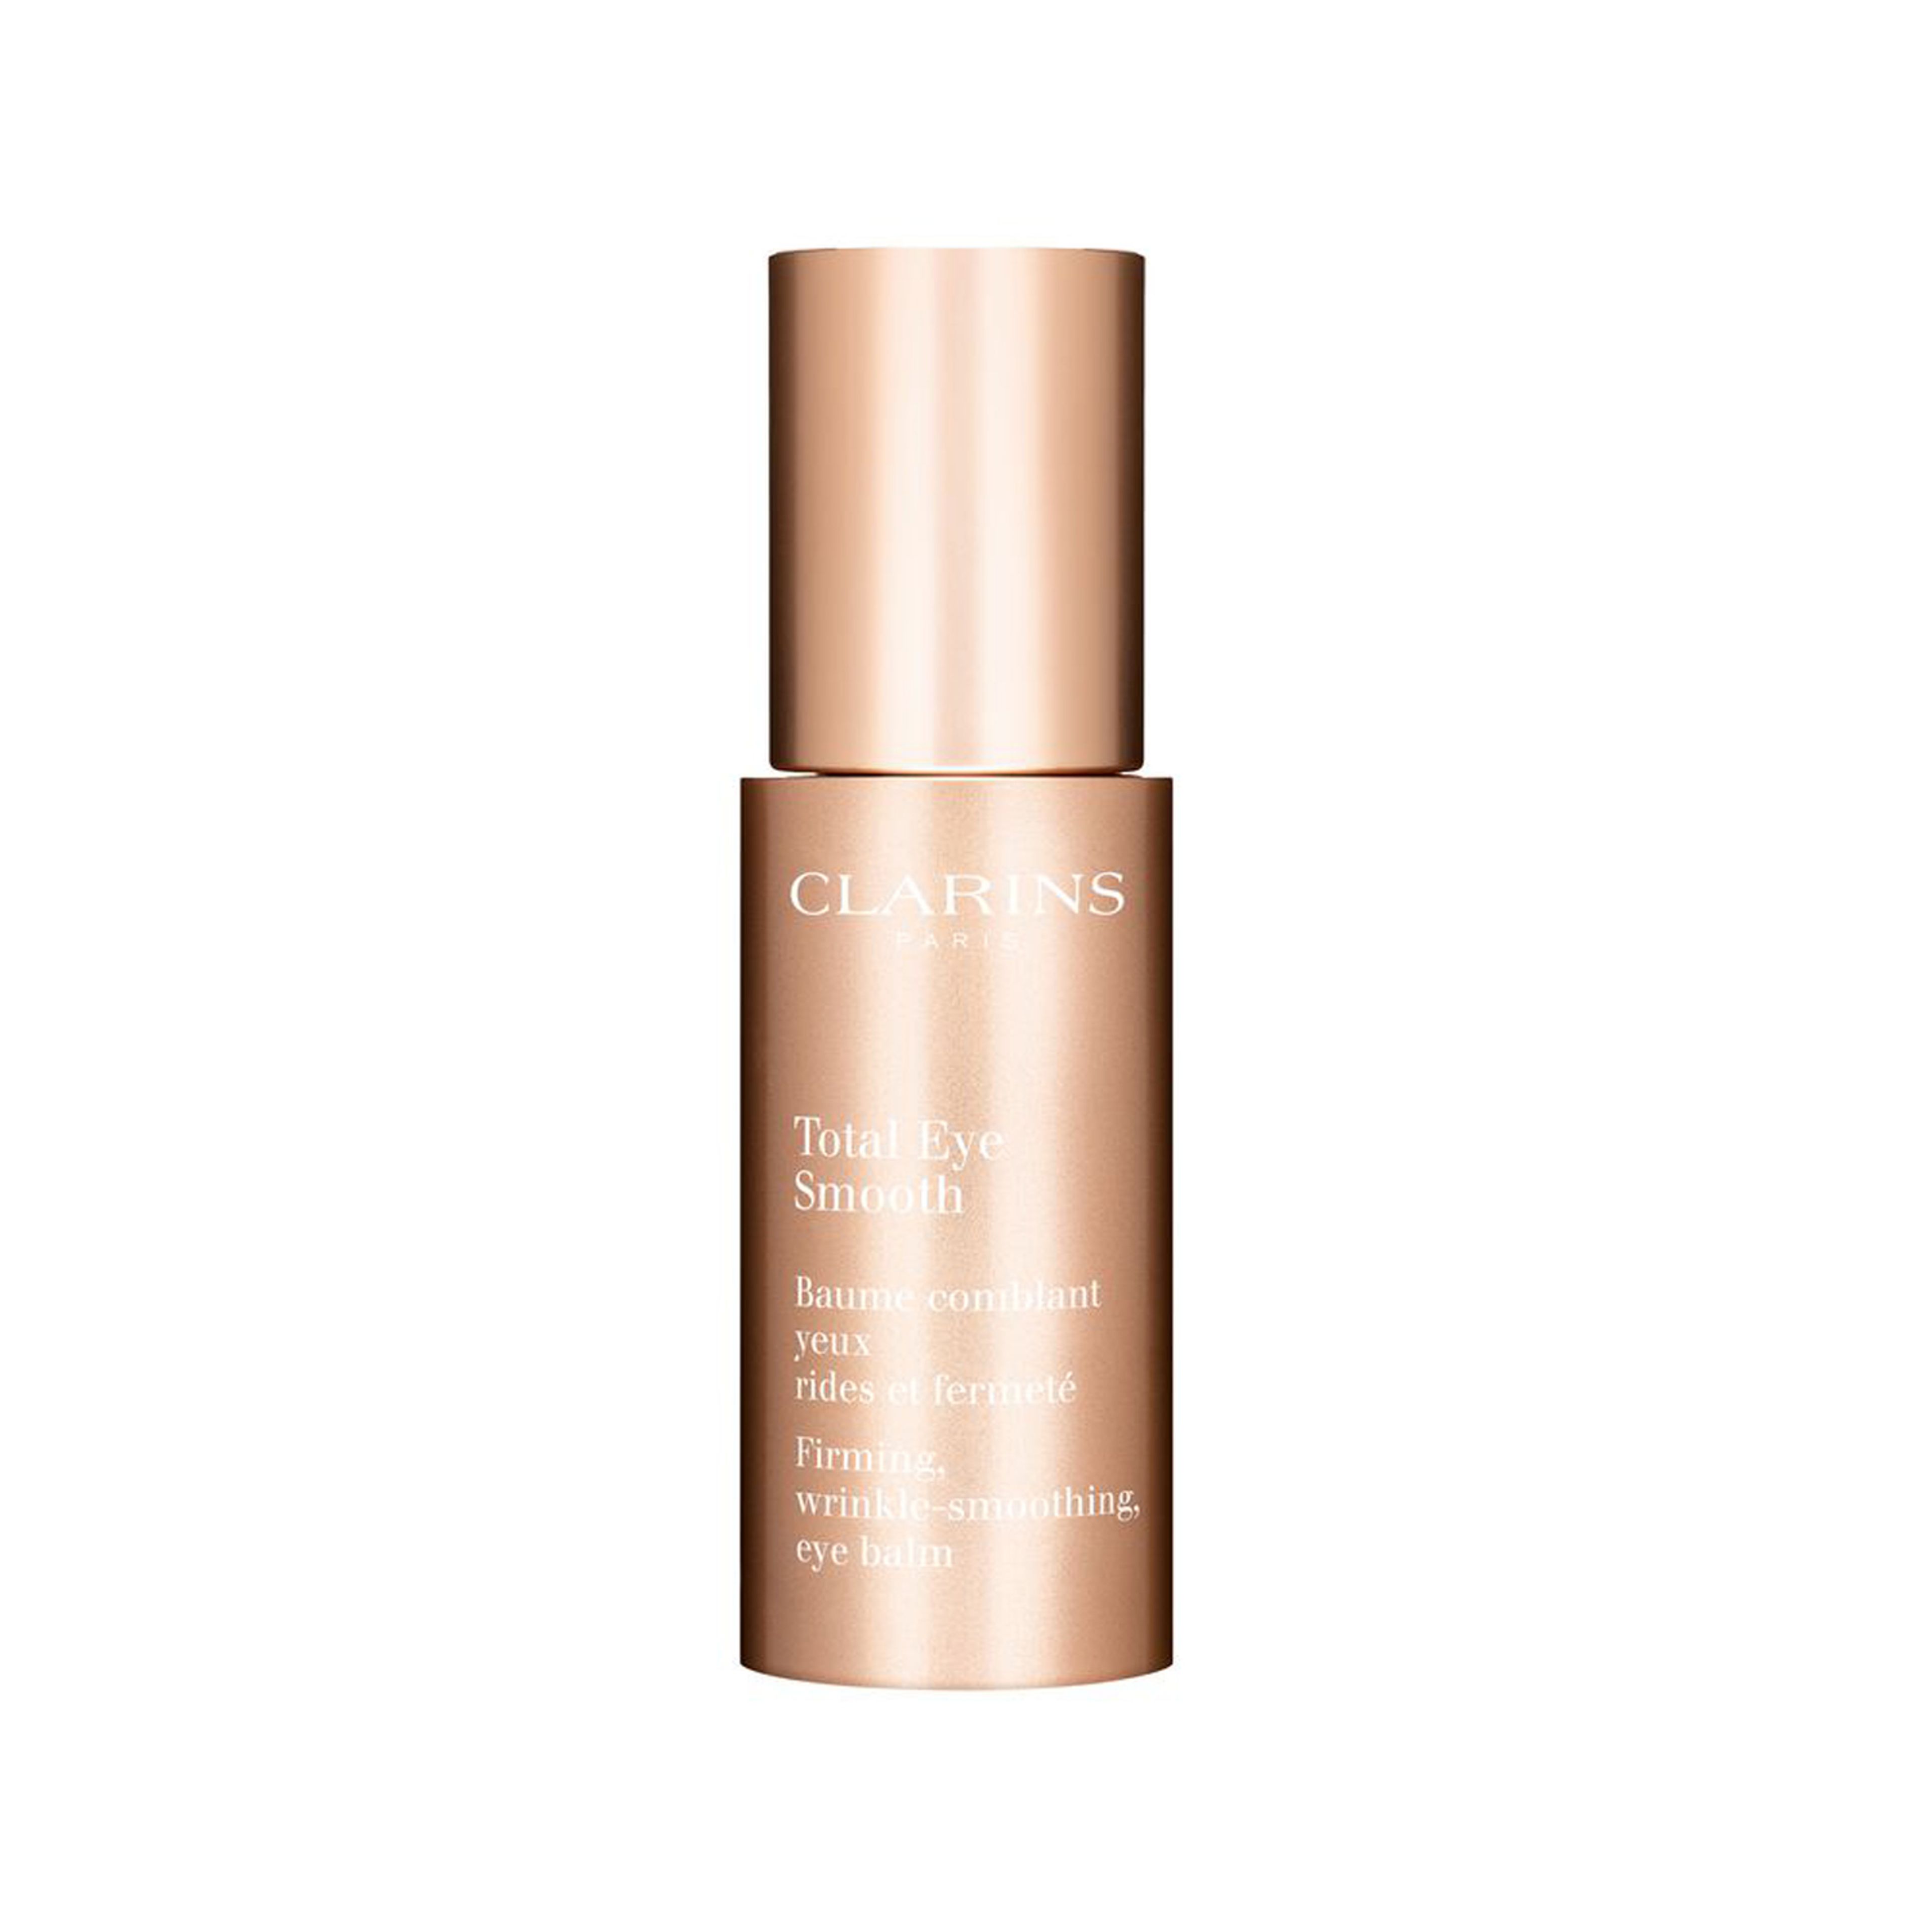 Clarins Total Eye Smooth 2